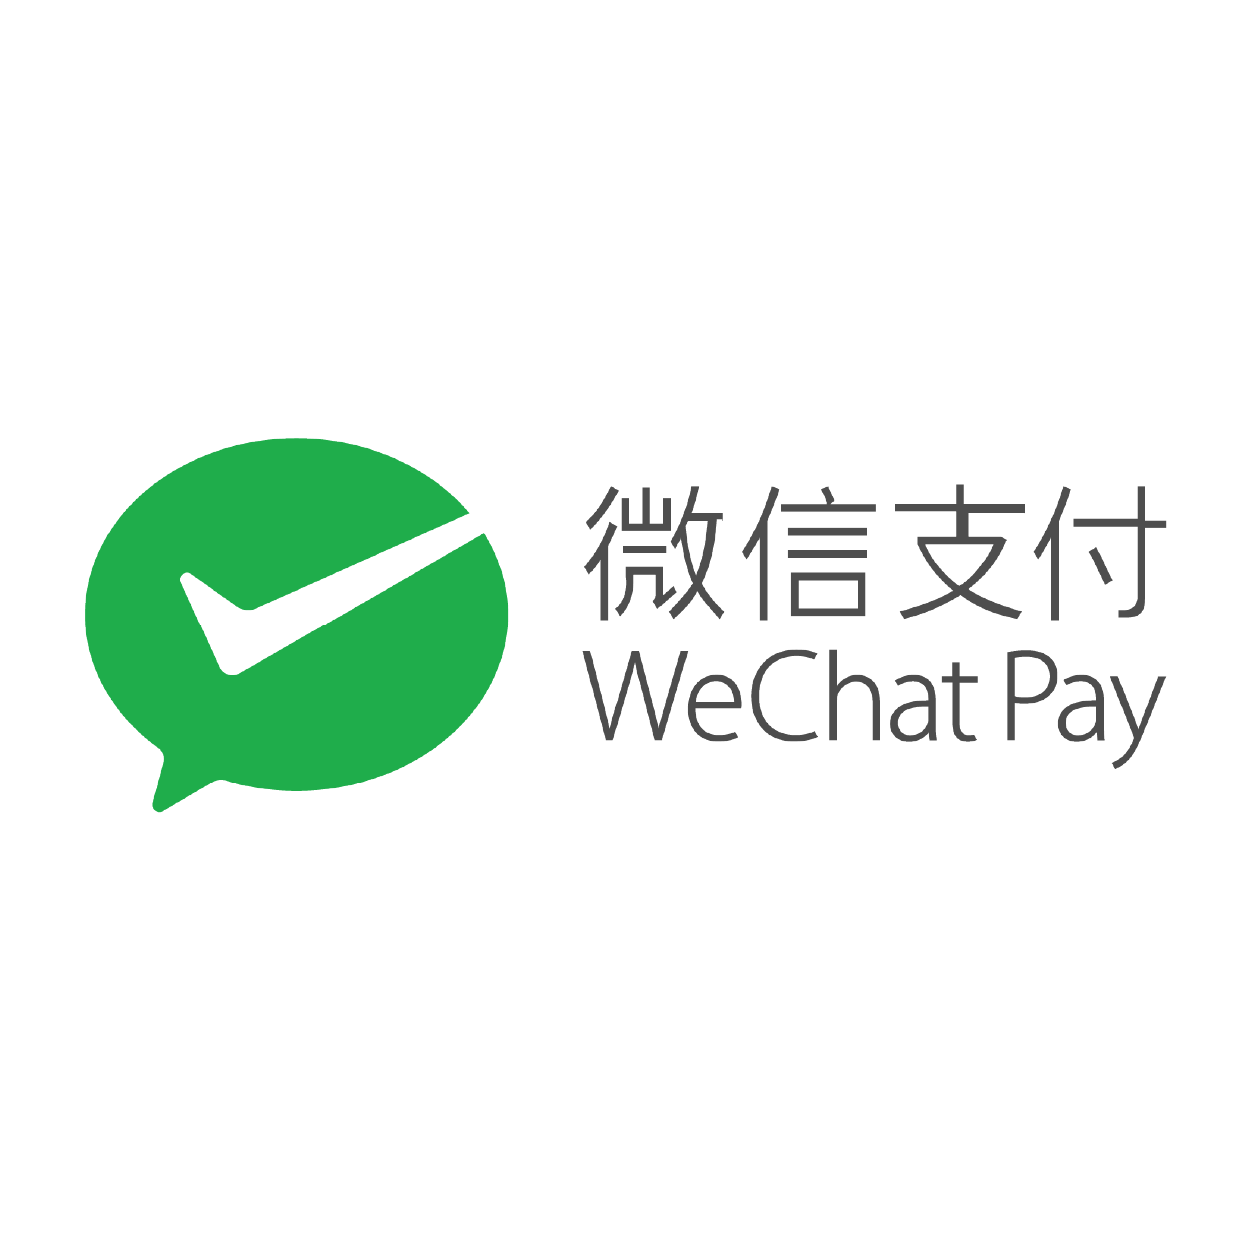 Simplify transactions with WeChat Pay, a popular mobile payment solution.